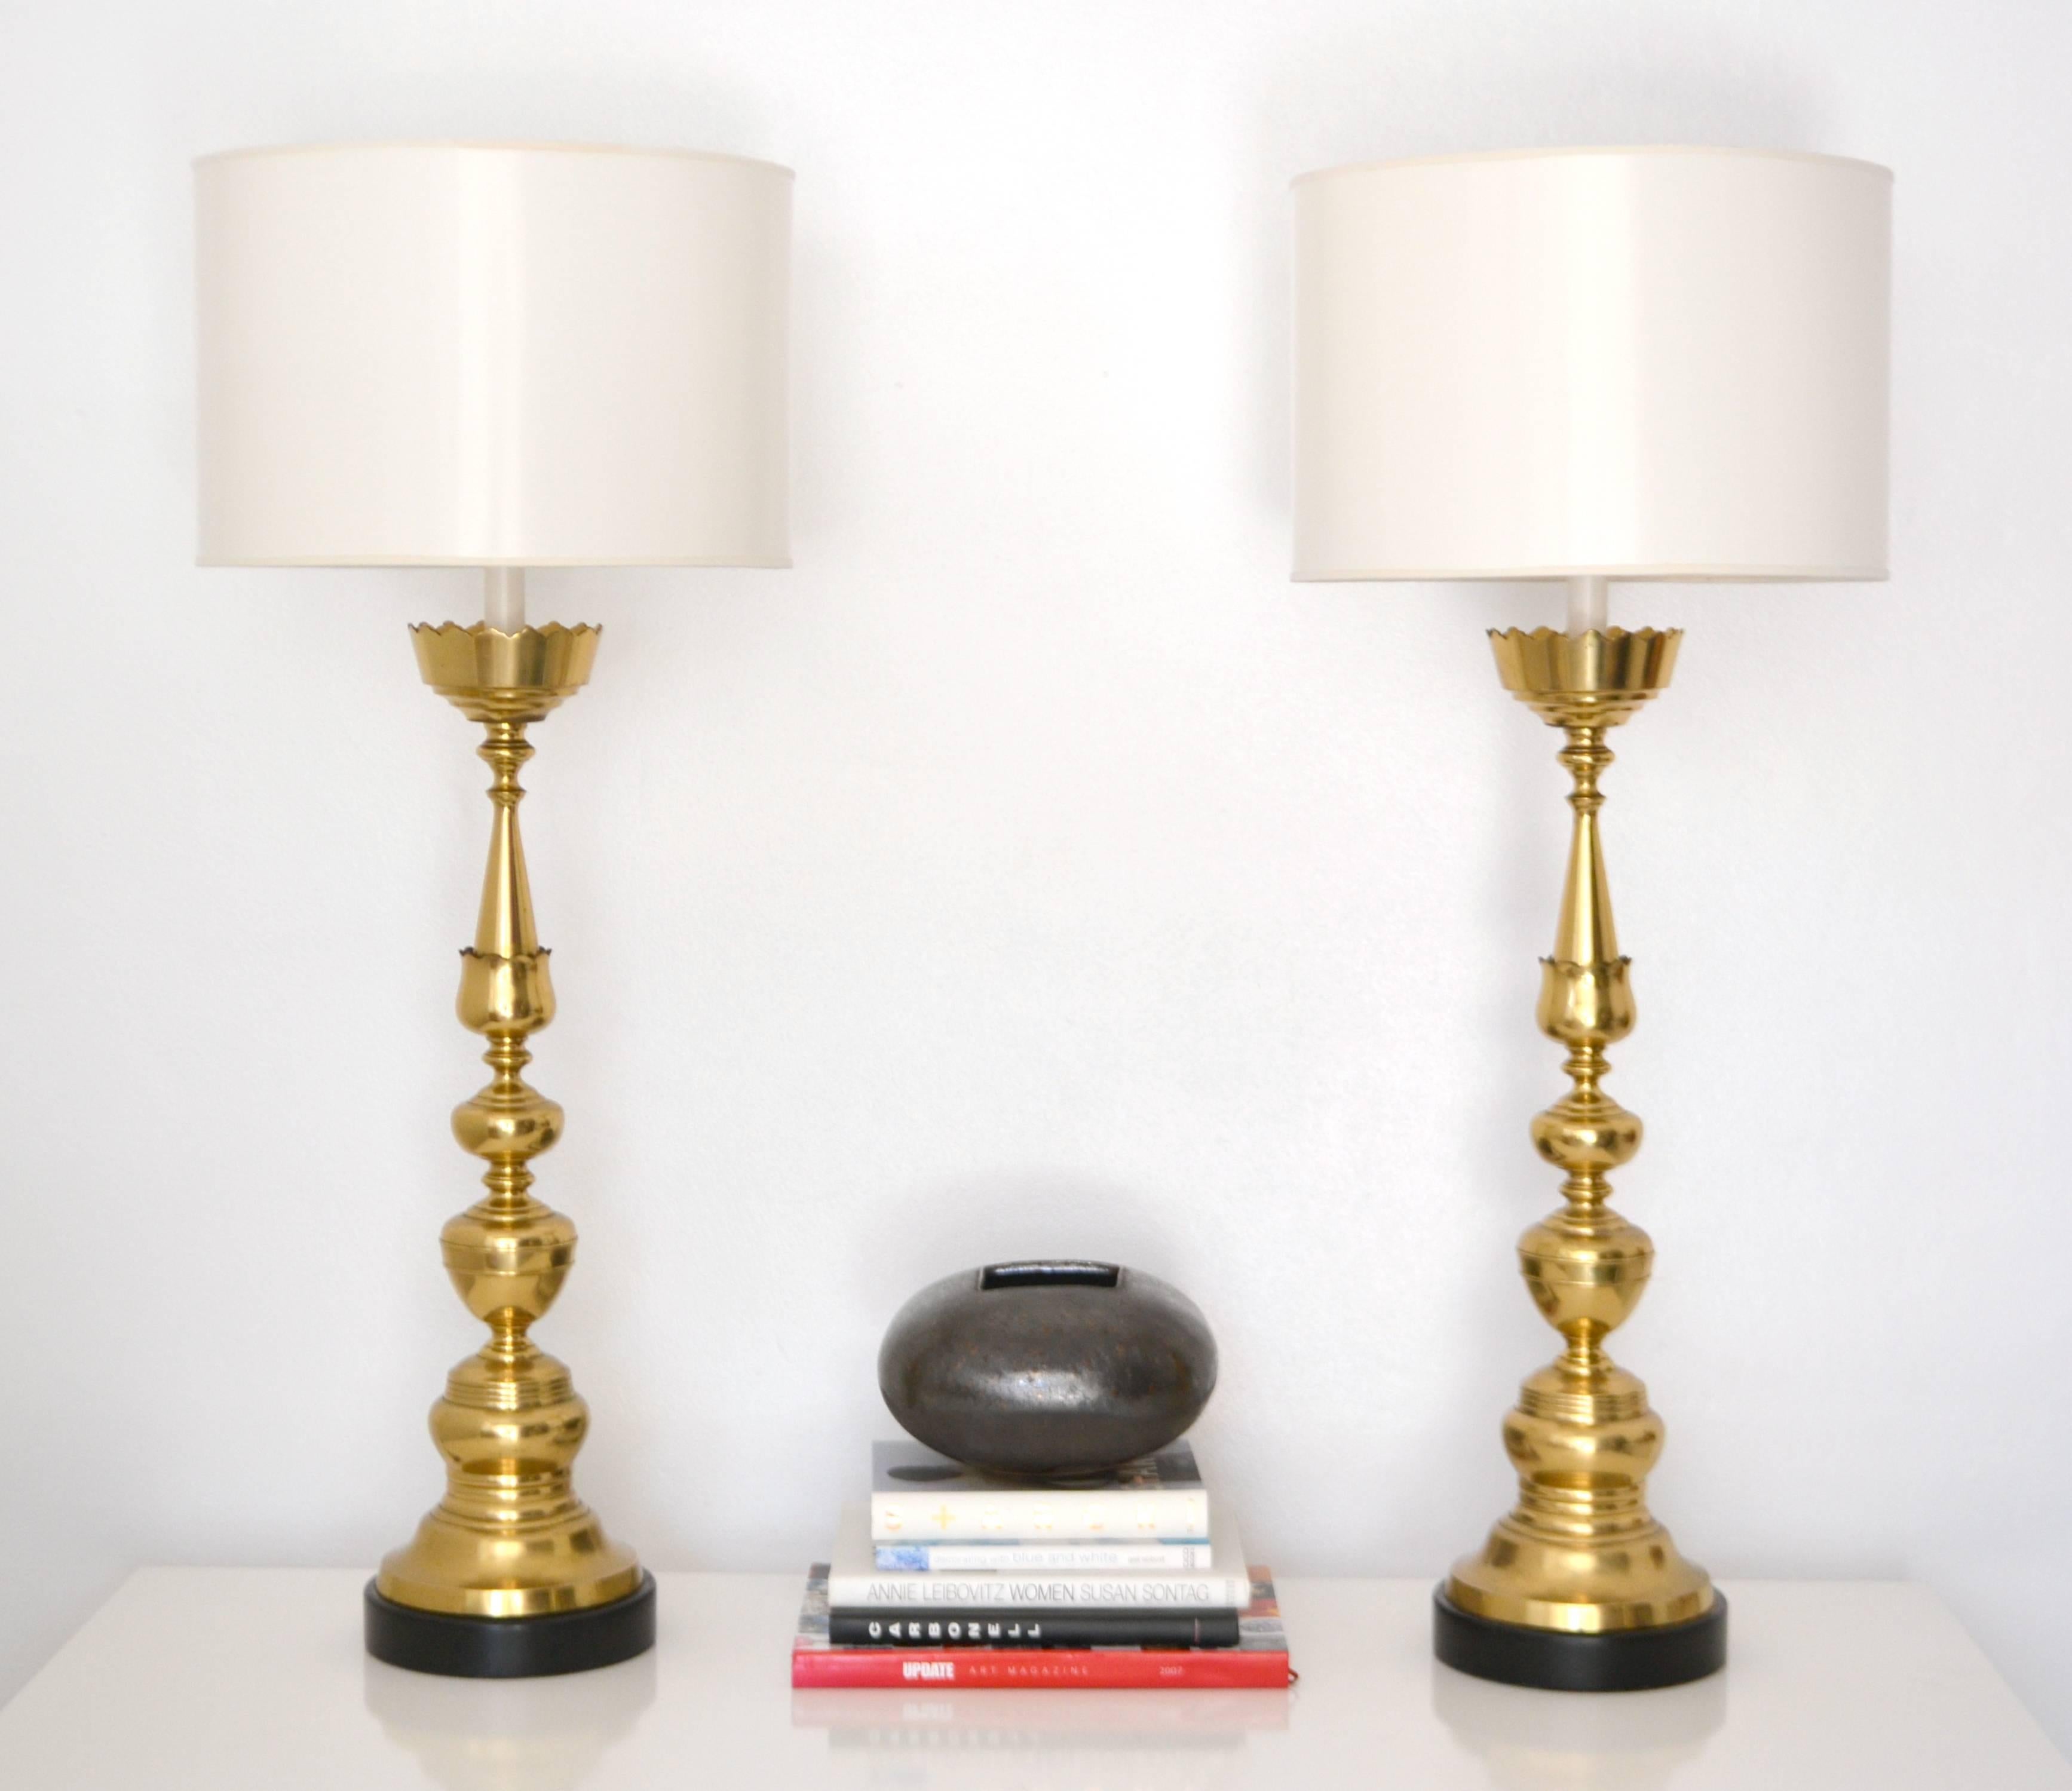 Glamorous pair of Italian Mid-Century turned brass candlestick table lamps, circa 1960s. These striking artisan crafted highly decorative lamps are mounted on turned wood ebonized bases and rewired with brass hardware and silk cords. Shades not